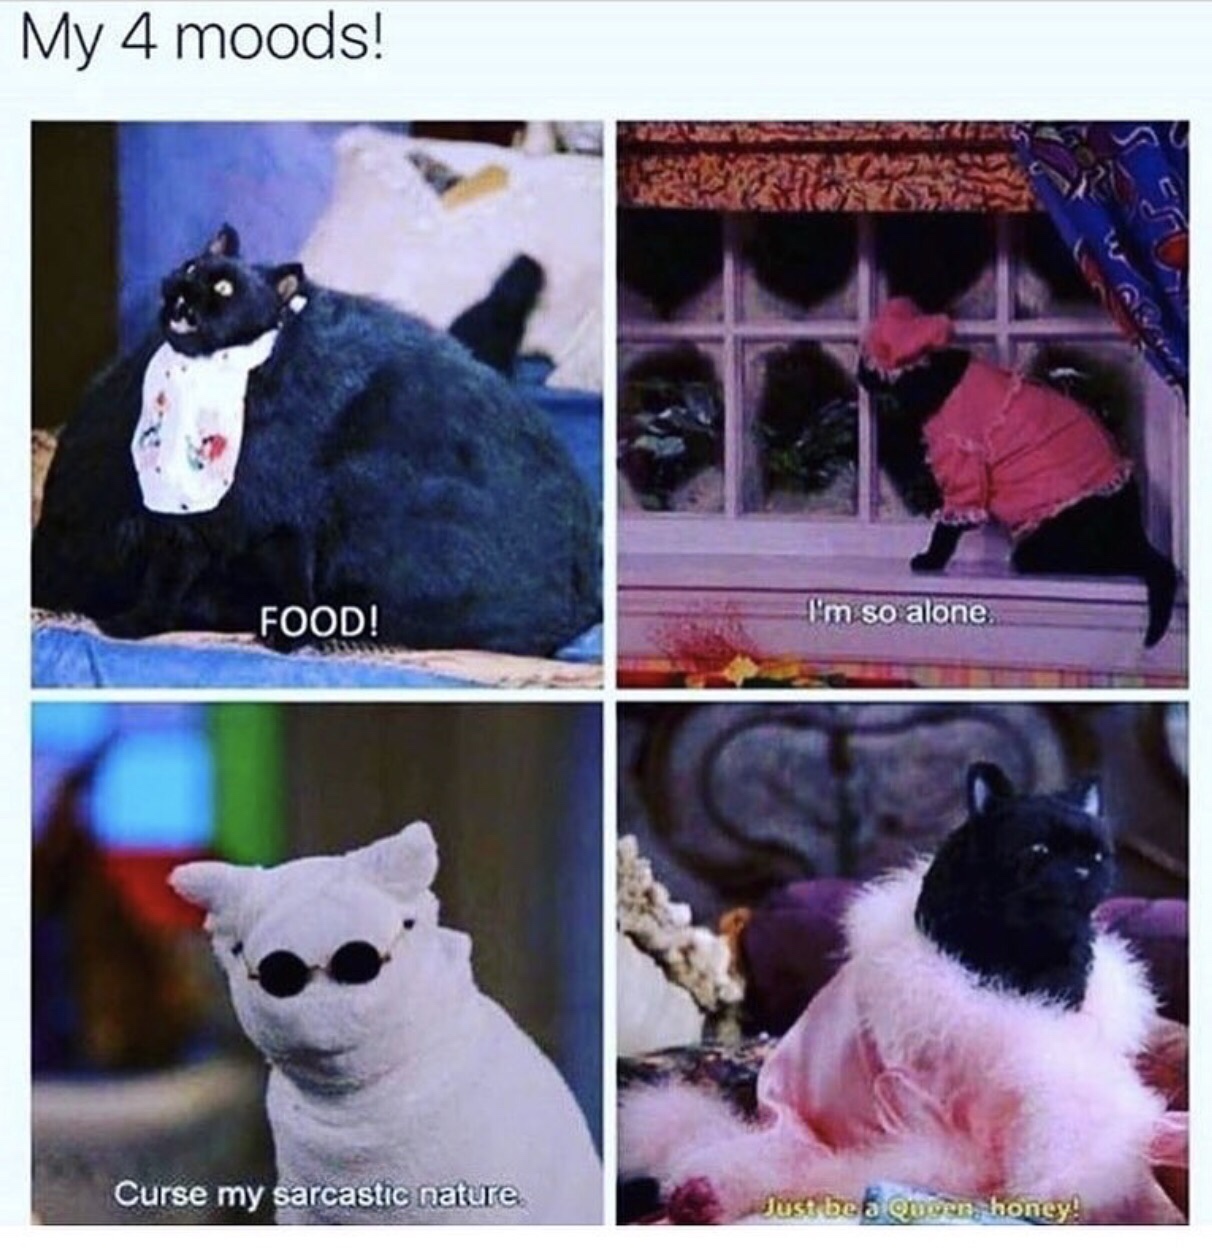 my 4 moods salem - My 4 moods! Food! I'm so alone. Curse my sarcastic nature Just be on war, honey!